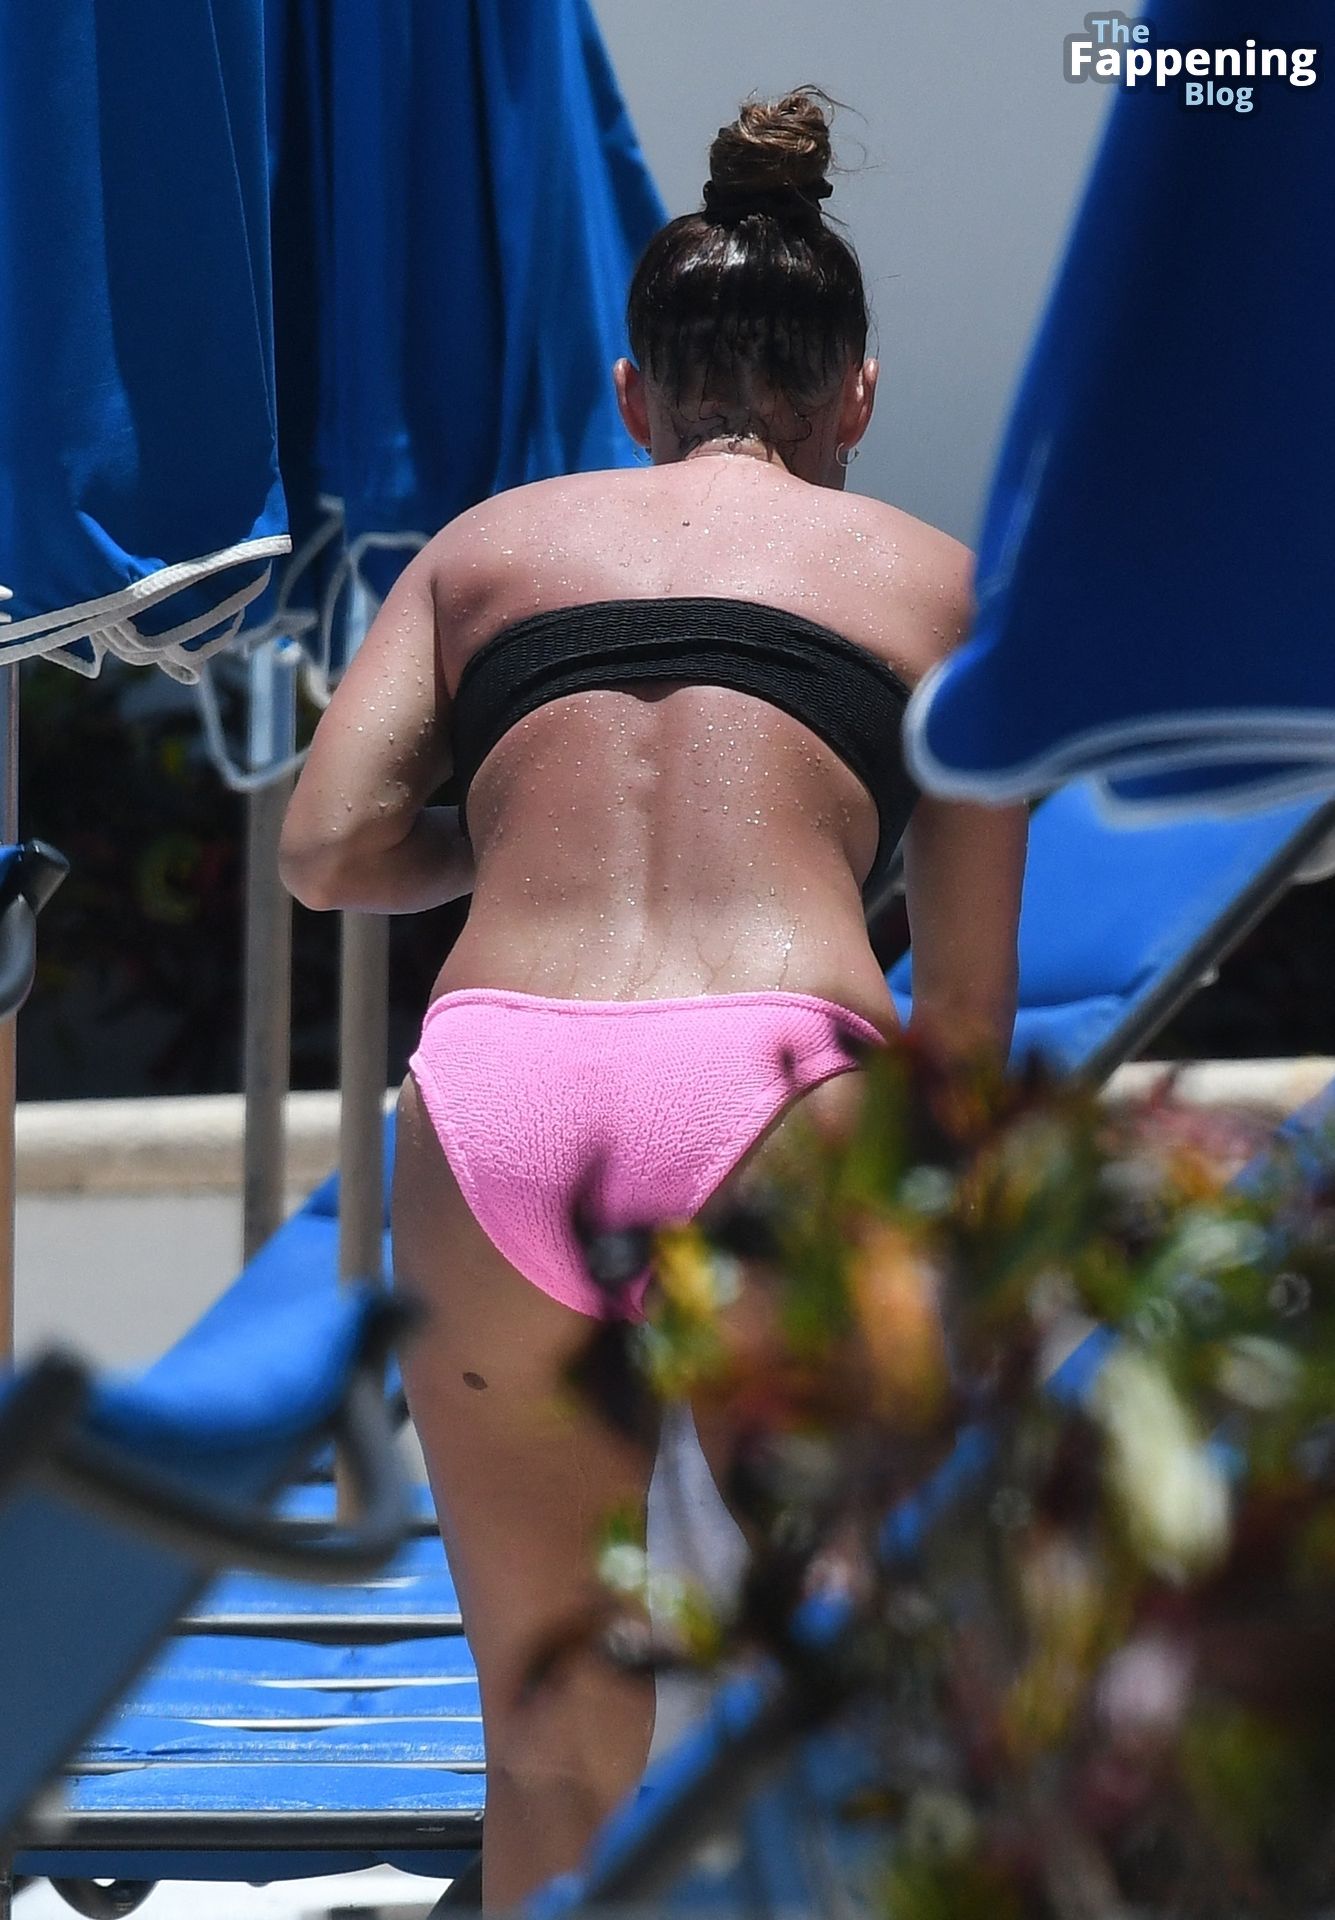 Coleen Rooney Shows Off Her Bikini Body After Enjoying a Dip in Her Hotel Pool in Ft. Lauderdale (Photos)